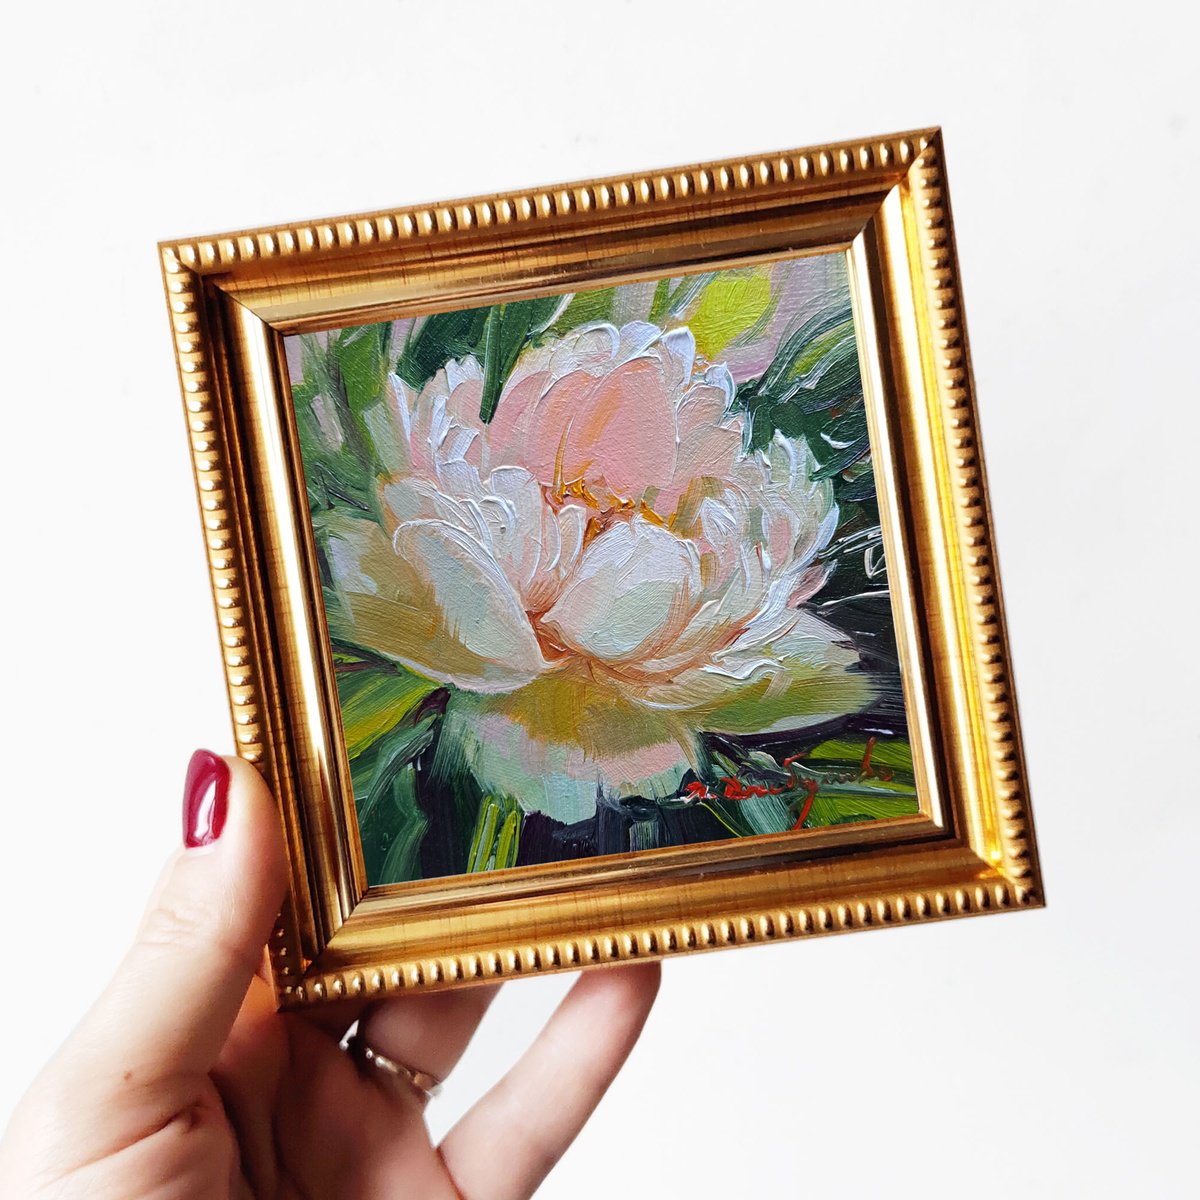 Small oil painting original framed art pale pink peony flower 10x10 cm by Nataly Derevyanko